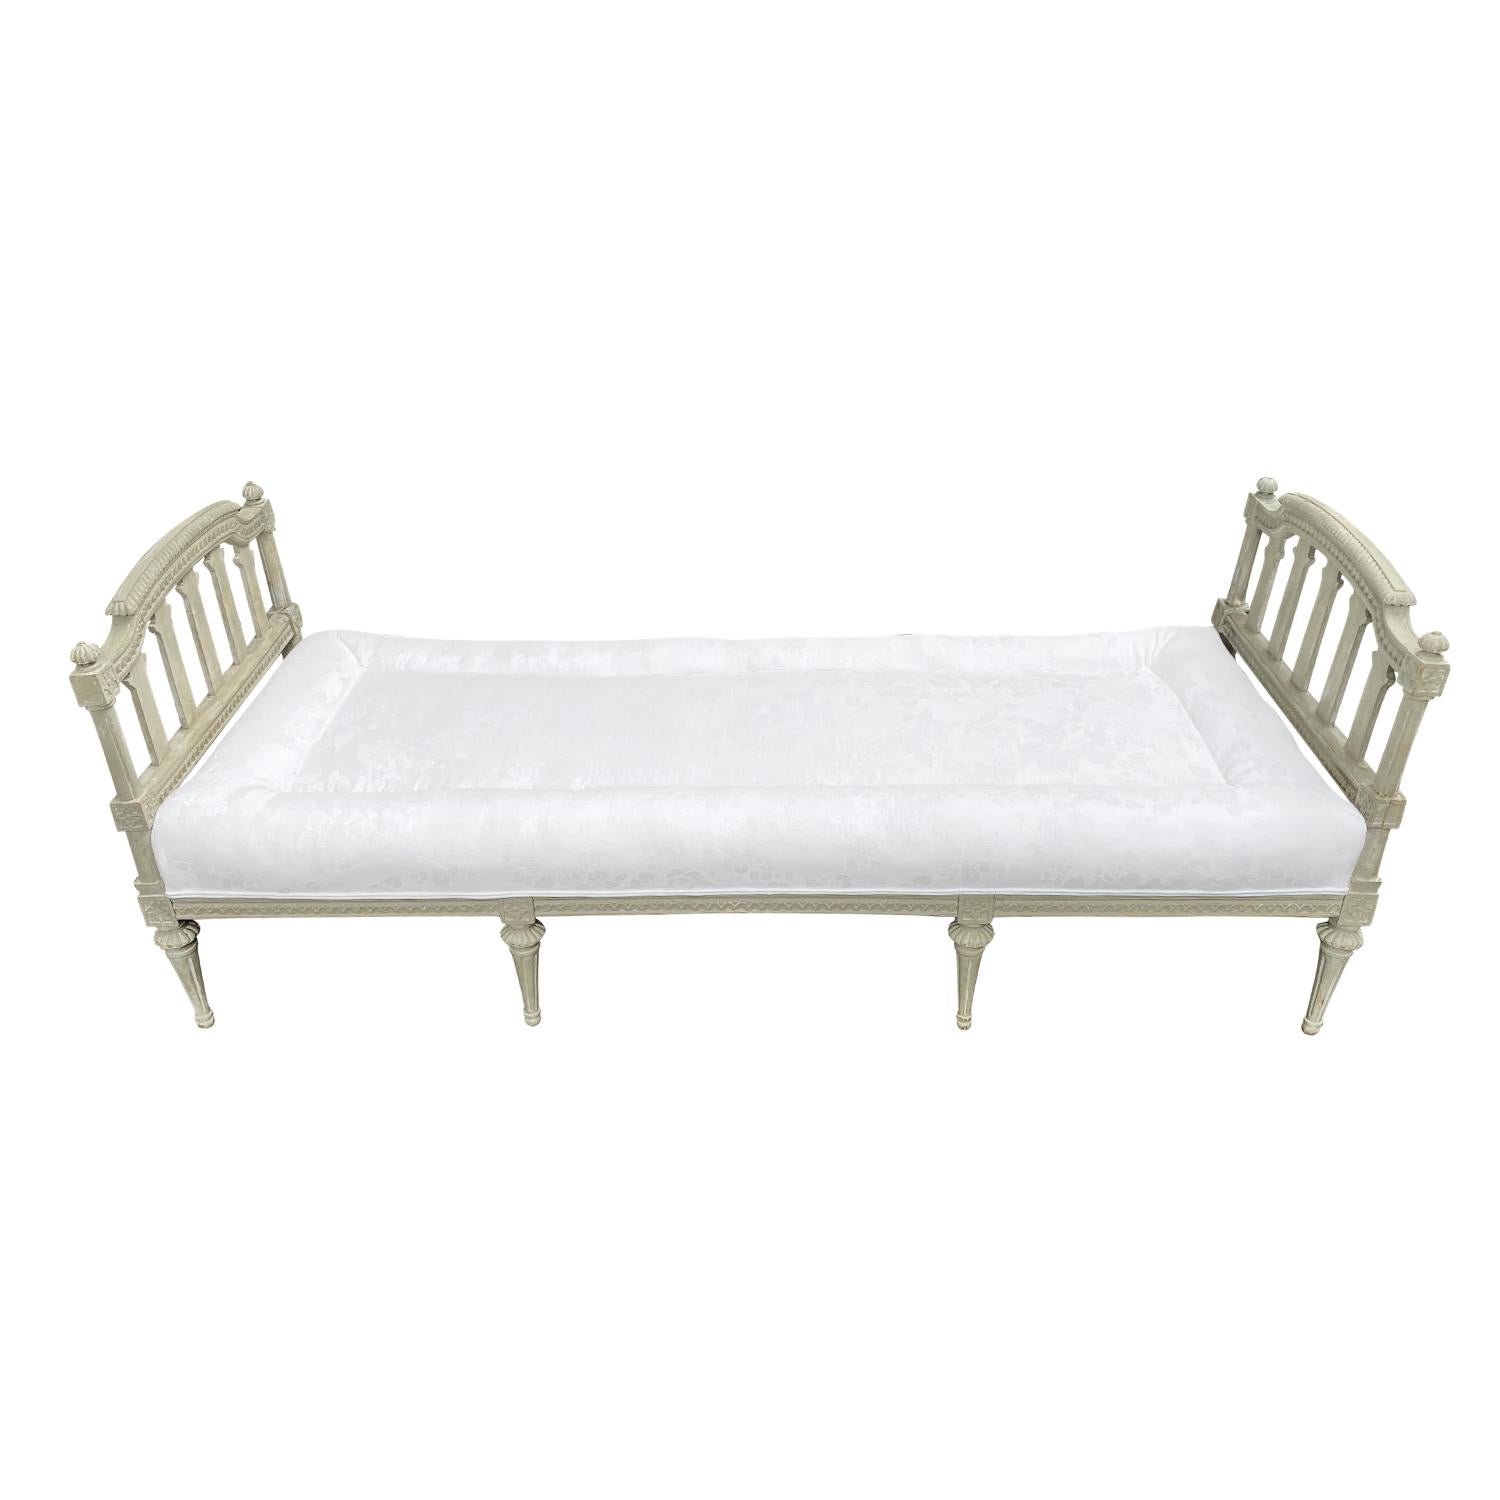 18th-19th Century White Swedish Gustavian Pinewood Daybed, Antique Sofa Bench For Sale 2